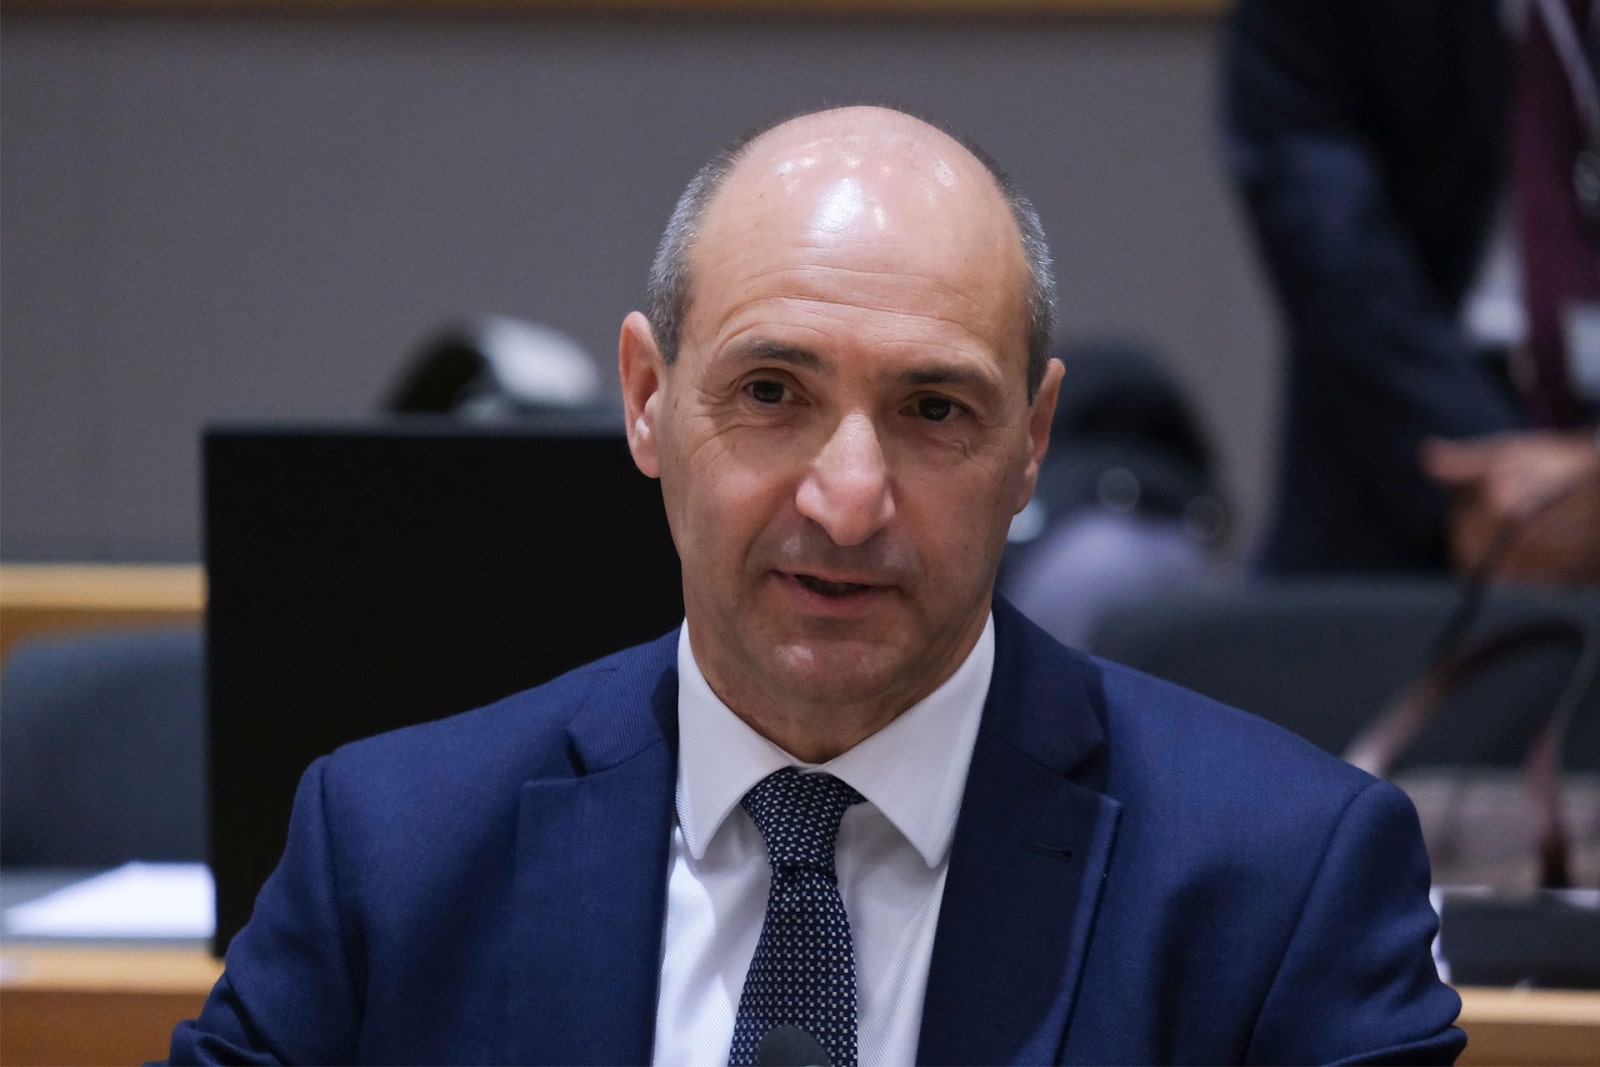 Malta to Probe Whether US Firm Commissioned Smear Campaign Against Health Minister